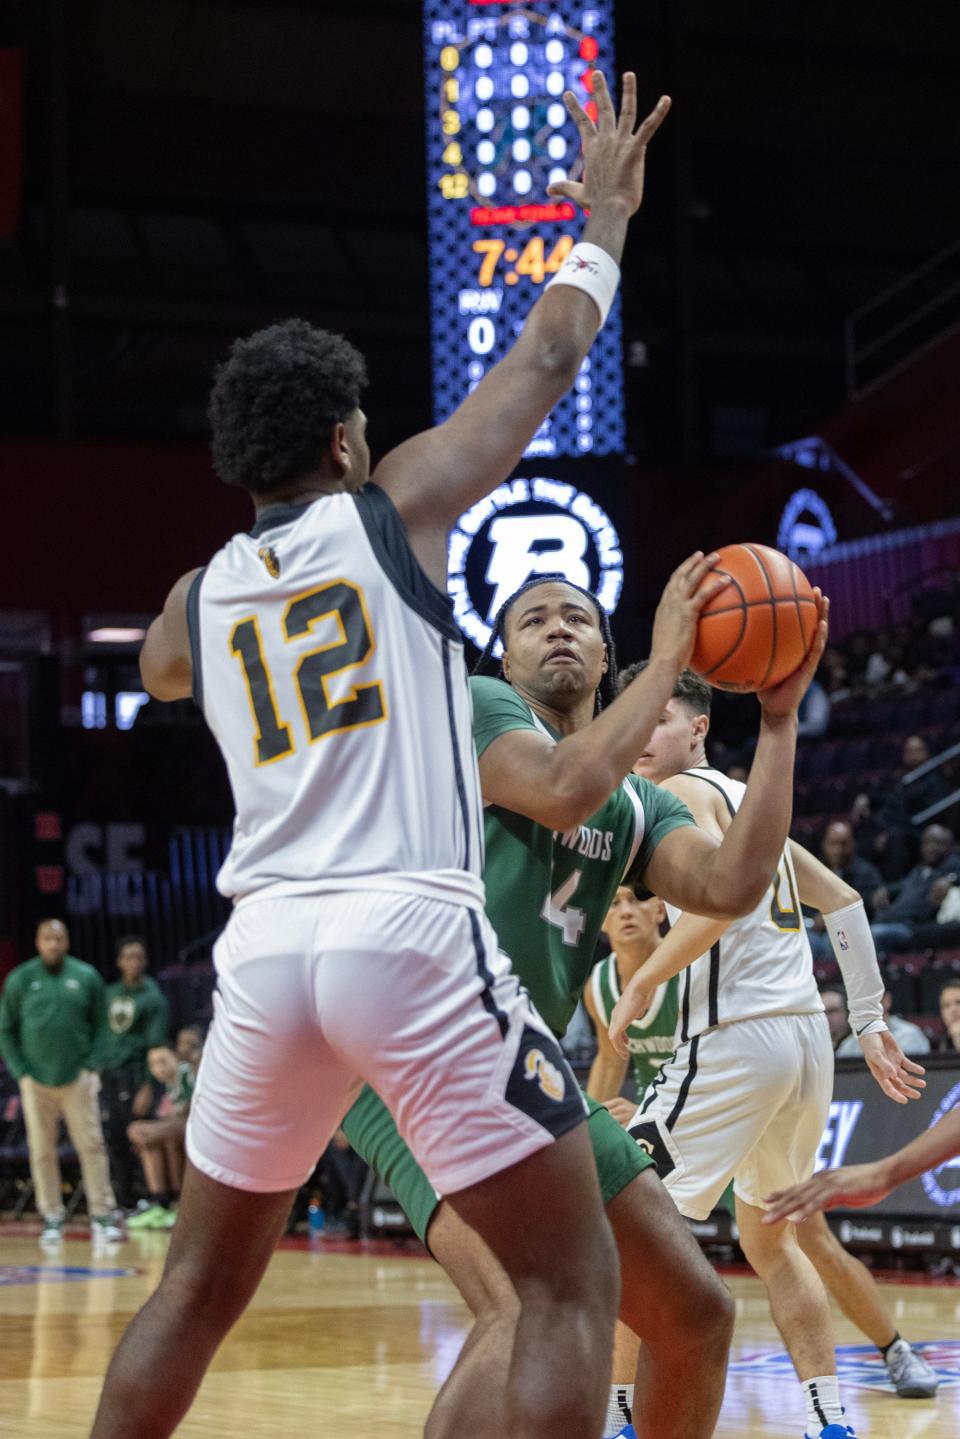 Richwoods Lathan Sommerville pulls up and shoots. Richwoods Knights vs College Achieve Knights of Asbury Park in The Battle basketball series at Rutgers on December 29, 2023.